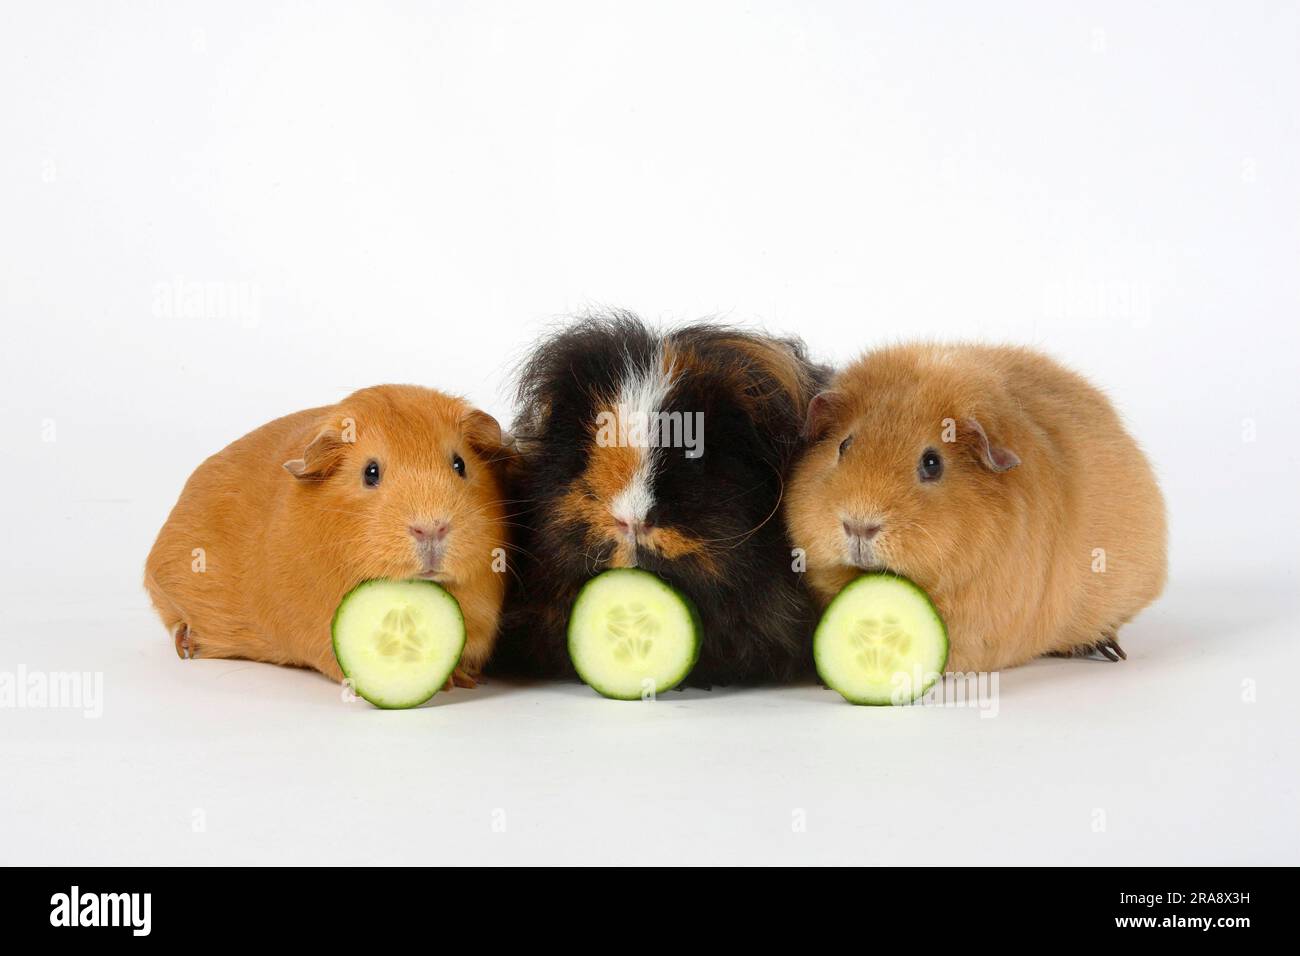 Smooth-armed guinea pig, Texel guinea pig and teddy guinea pig, cucumber slice, snake cucumber Stock Photo